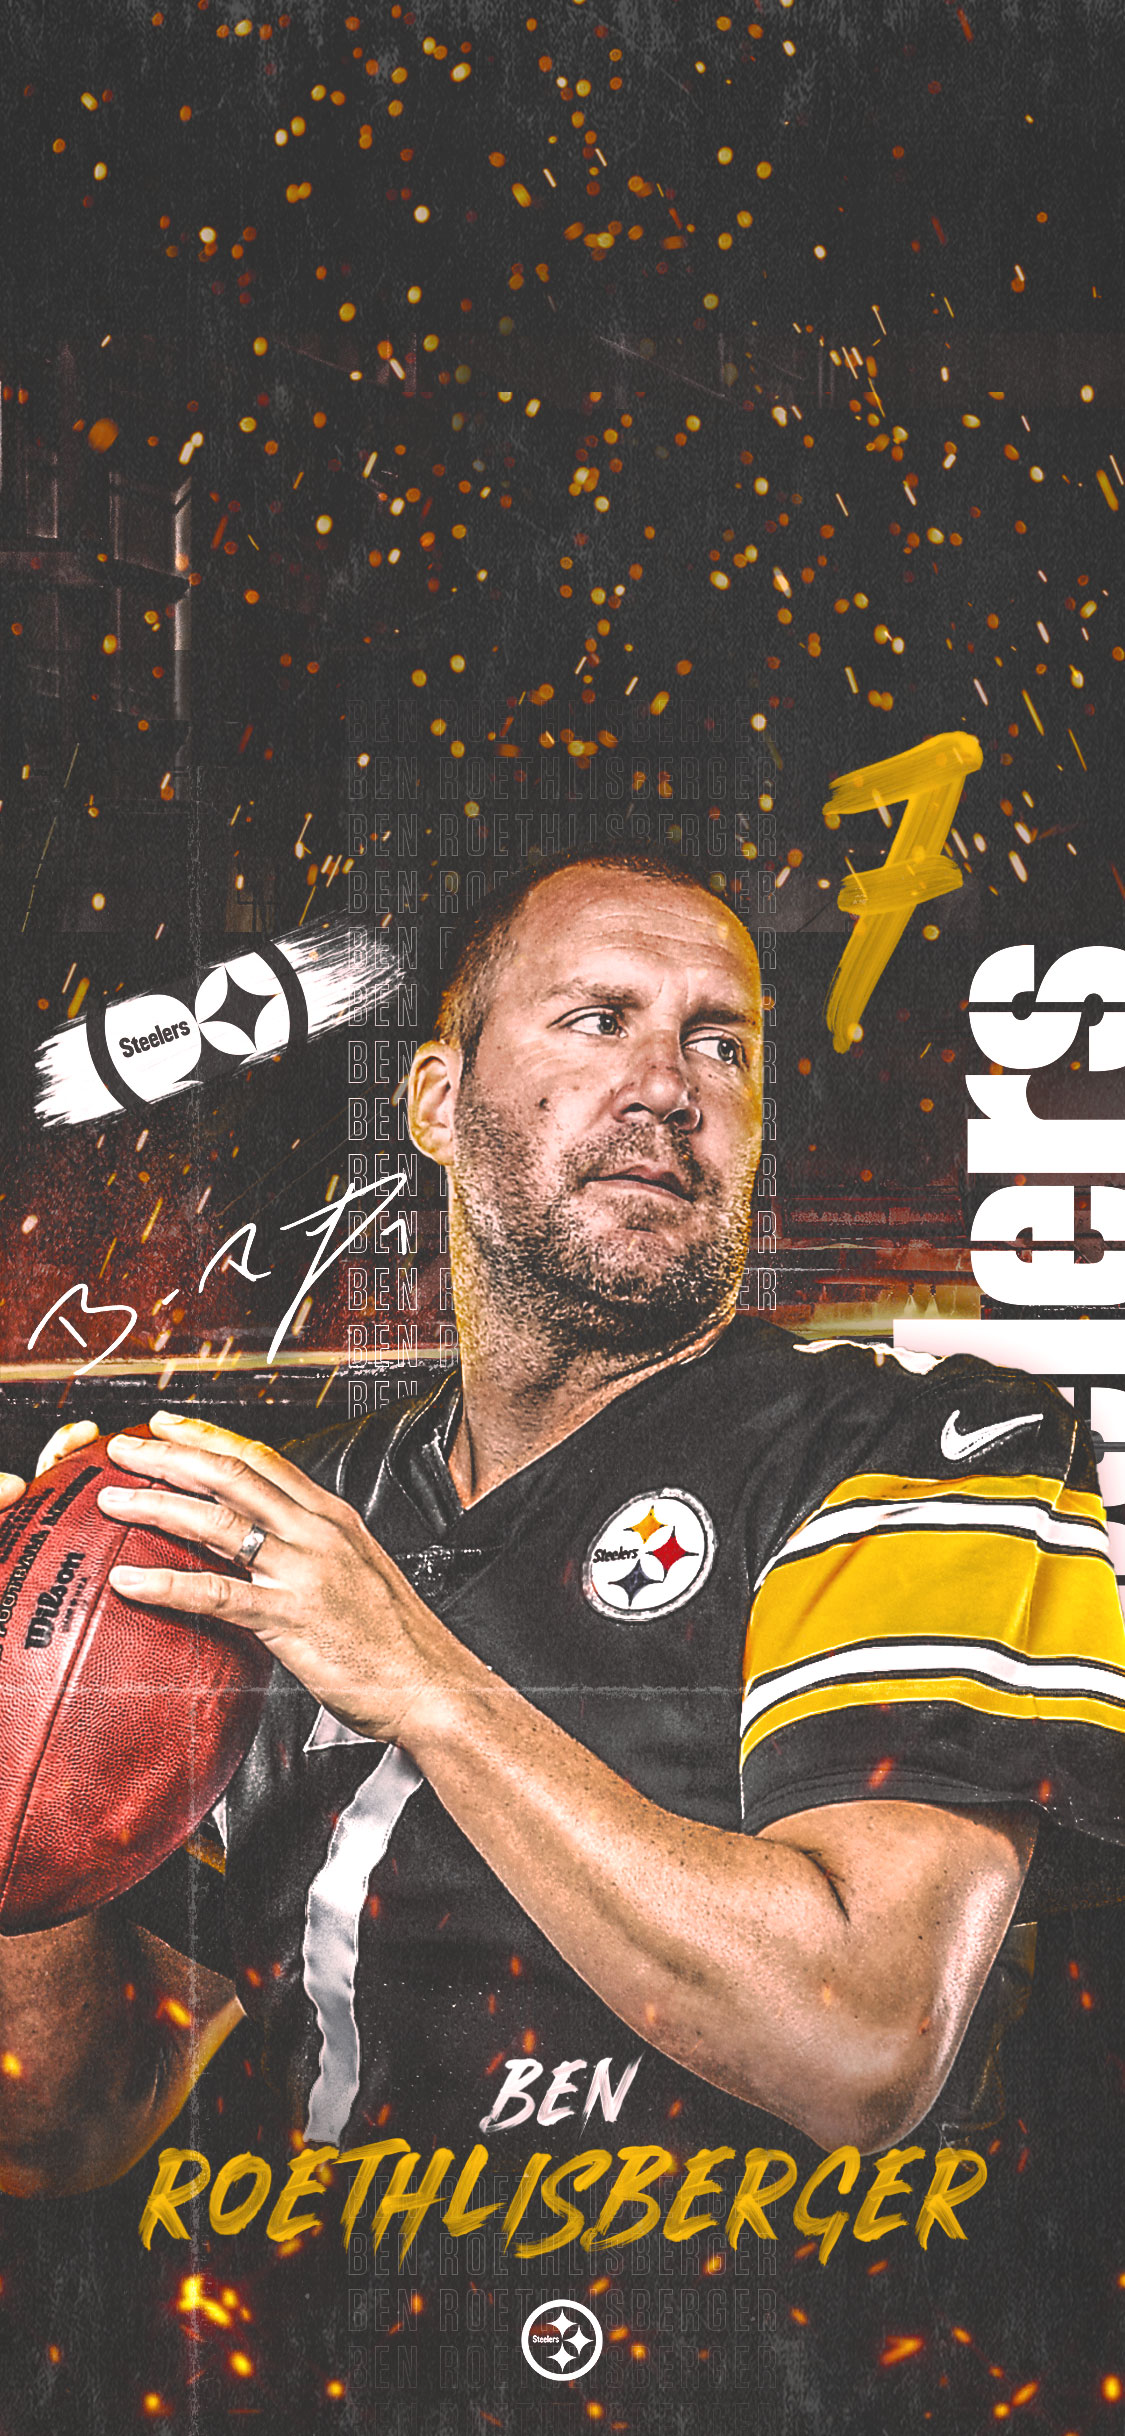 Ben Roethlisberger Winner of Two Super Bowls Retires From Pittsburgh  Steelers  The New York Times